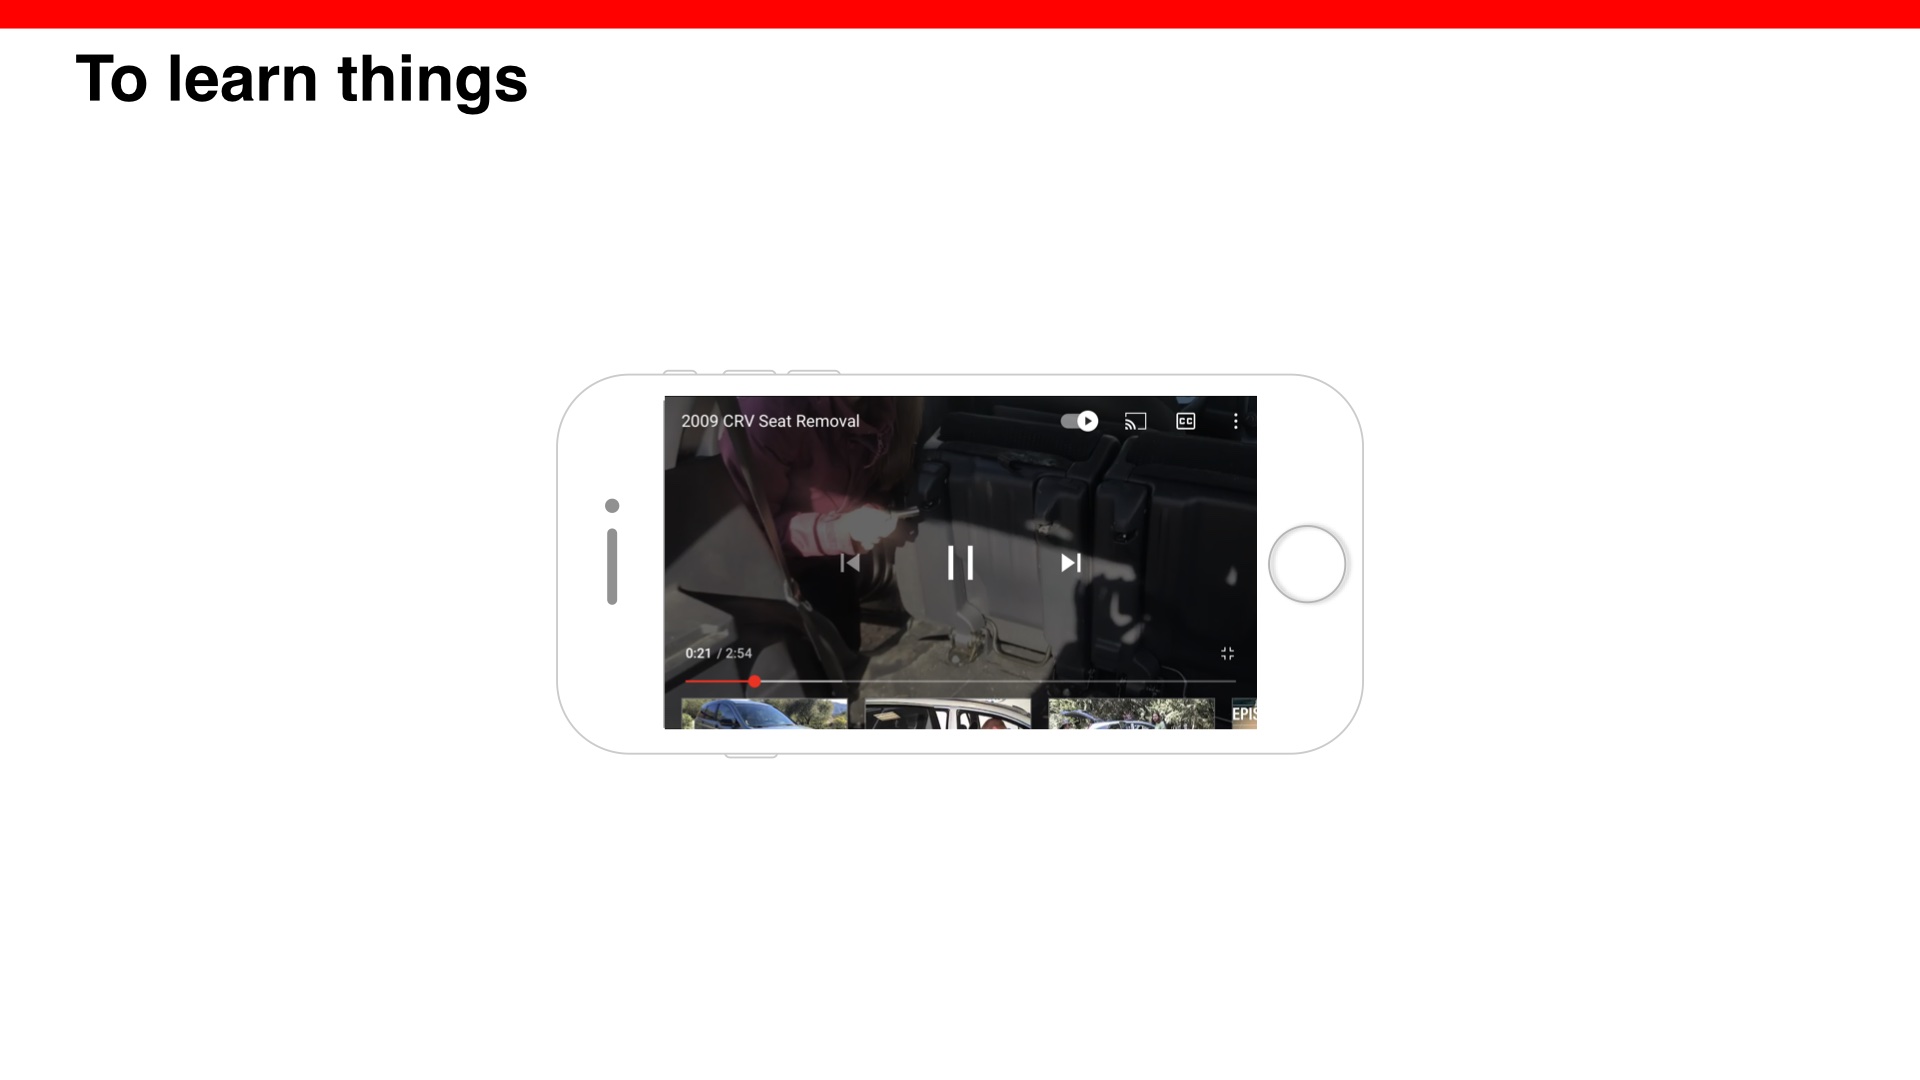 To learn things, image of horizontal phone with video of a woman removing the back seat of her Honda CRV